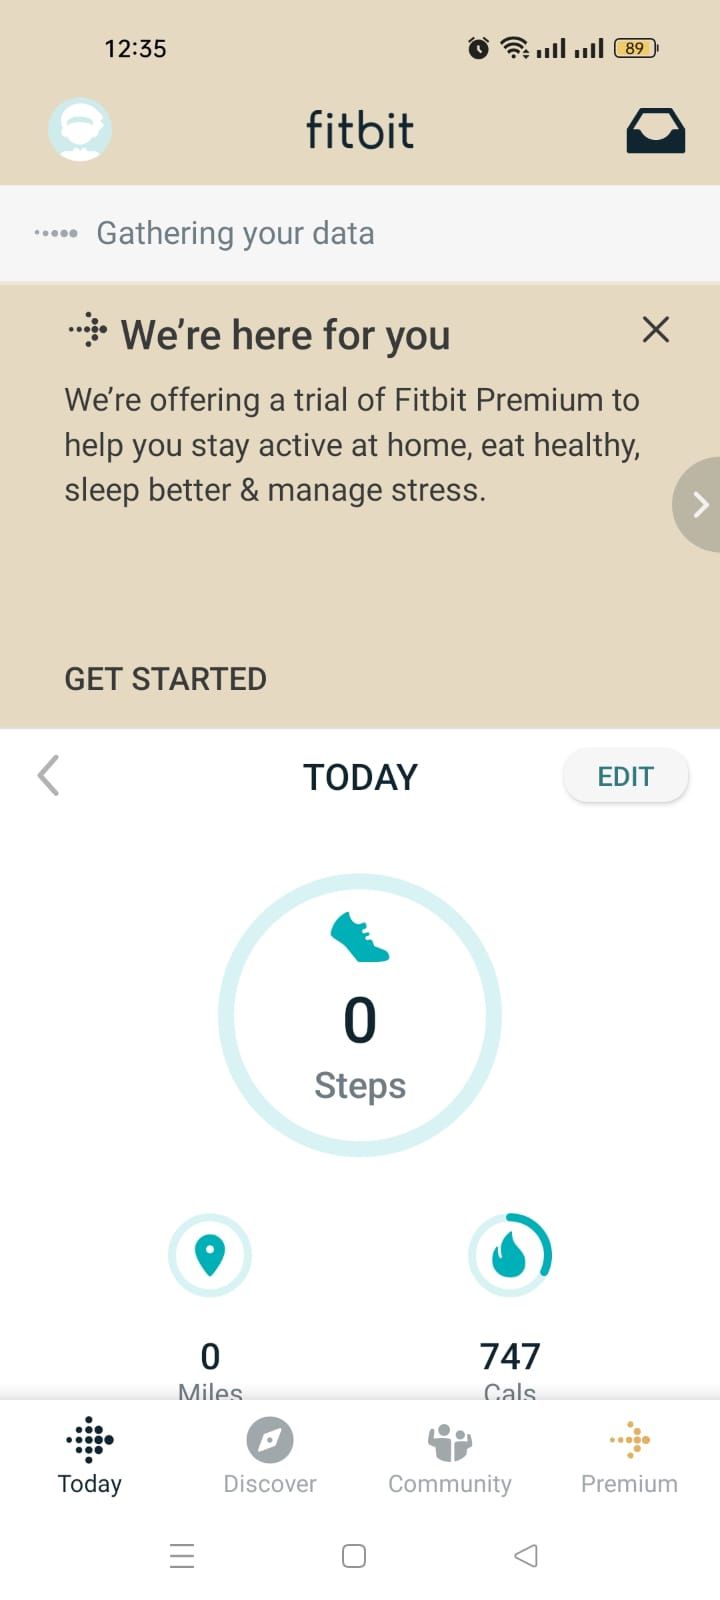 Fitbit - Today